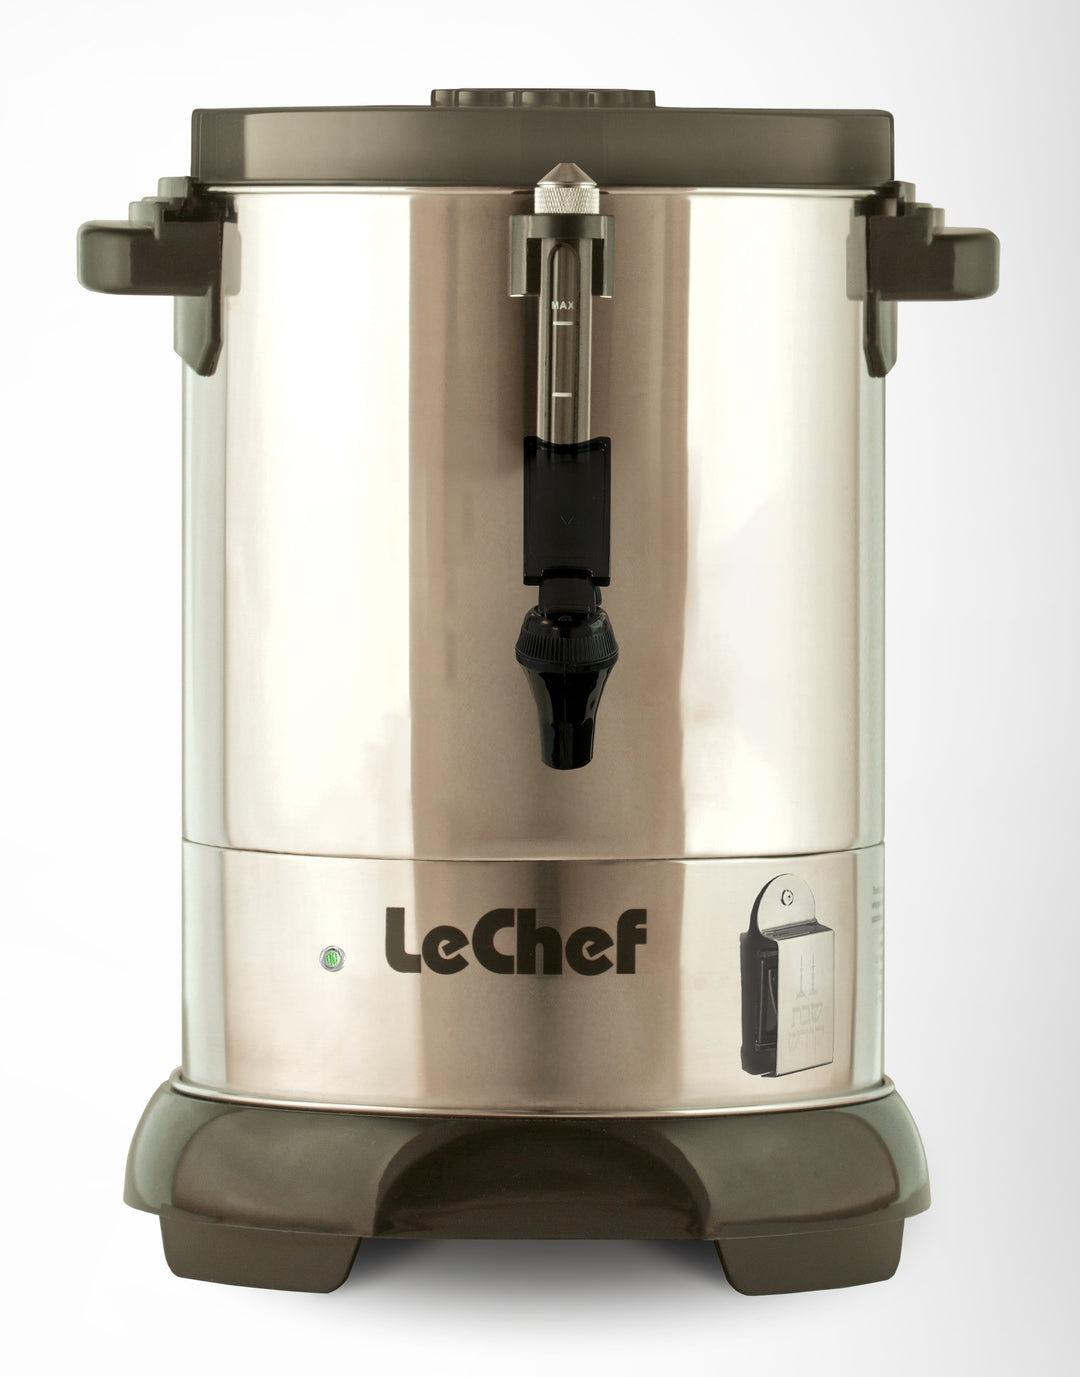 LE'CHEF ELECTRIC HOT WATER URN 30 CUP WITH SAFETY SPOUT MODEL# LURS30